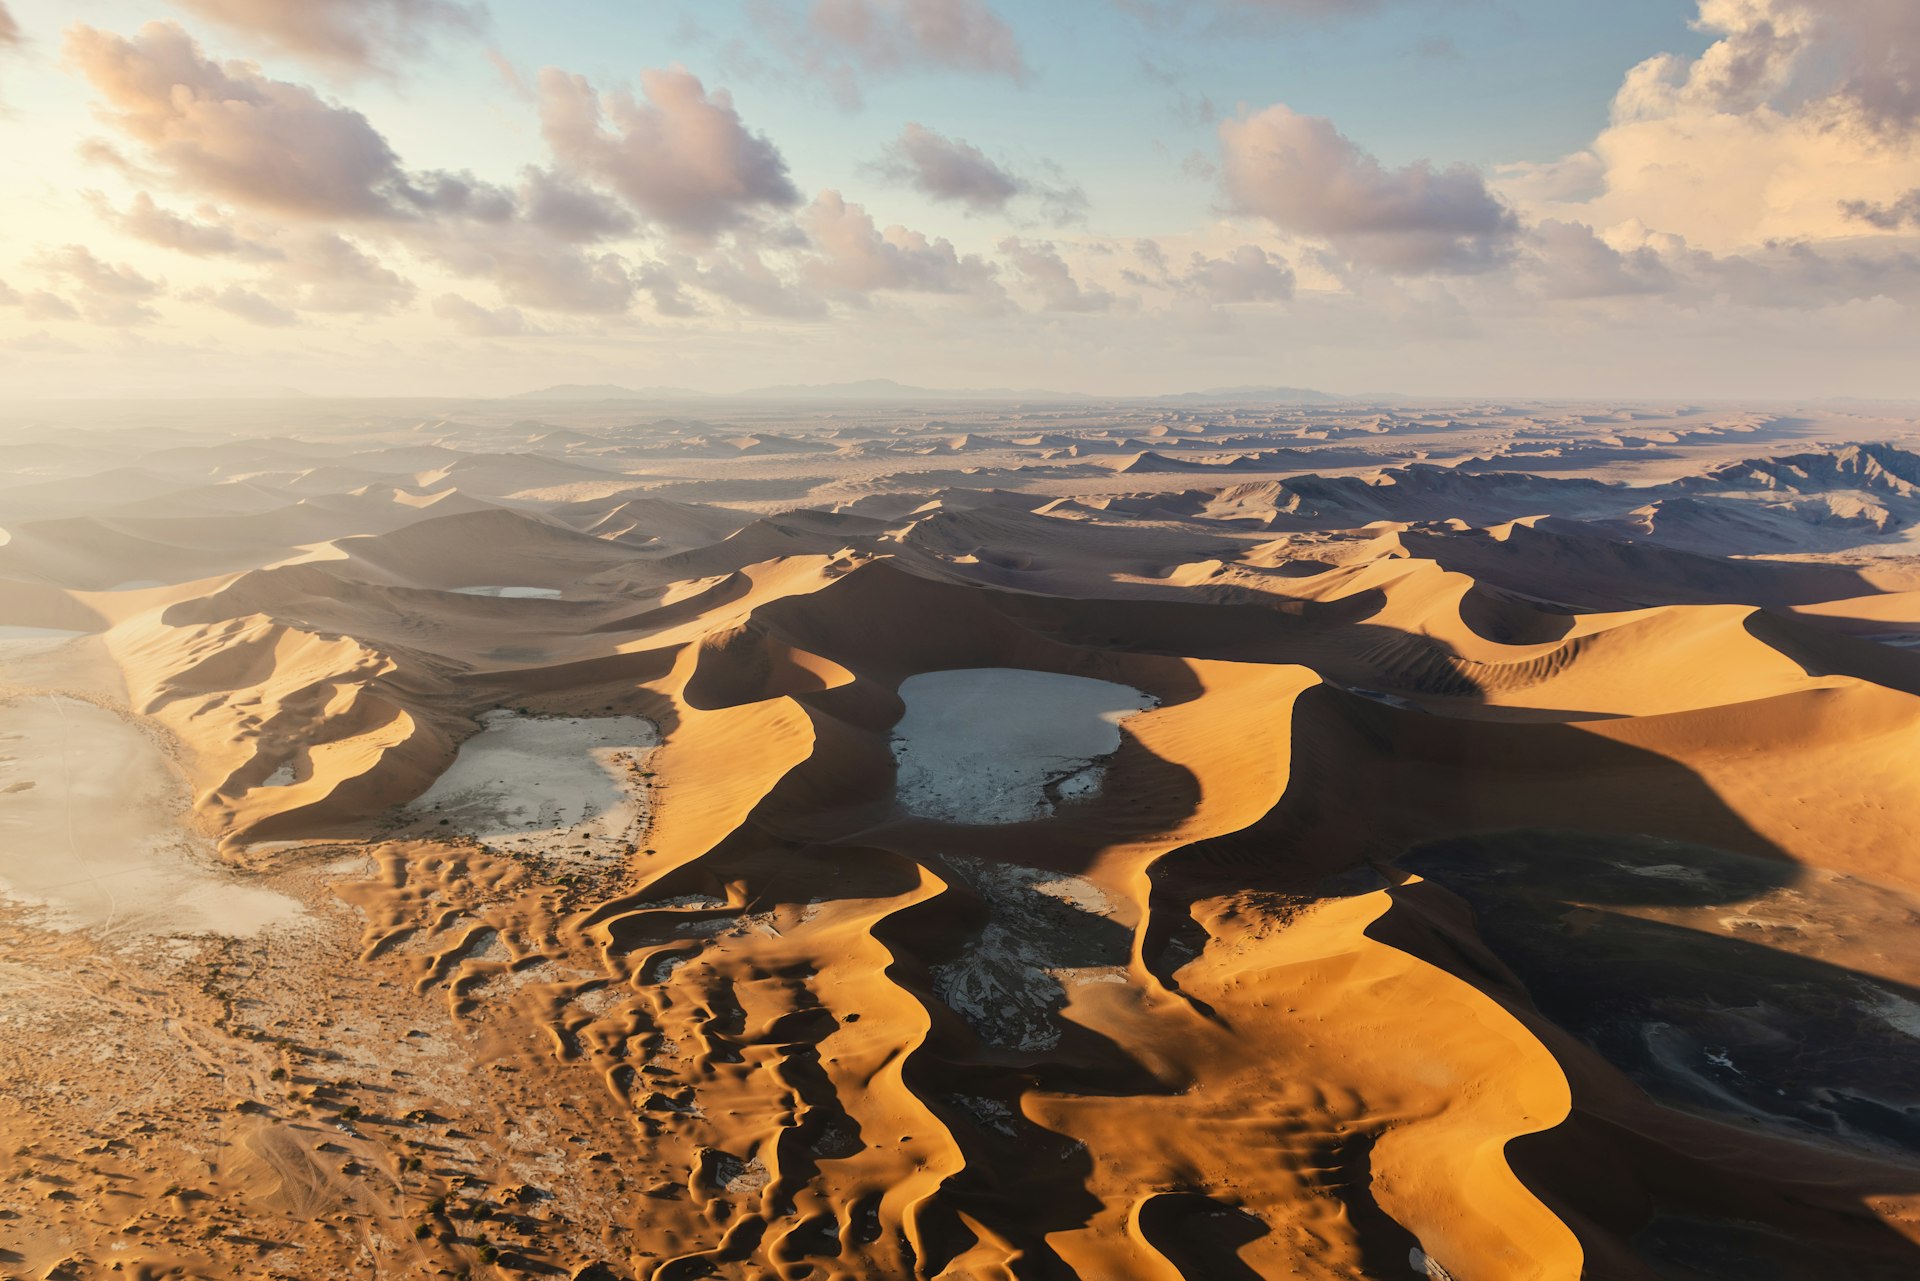 An aerial view over the Sossusvlei sand dunes, Namibia